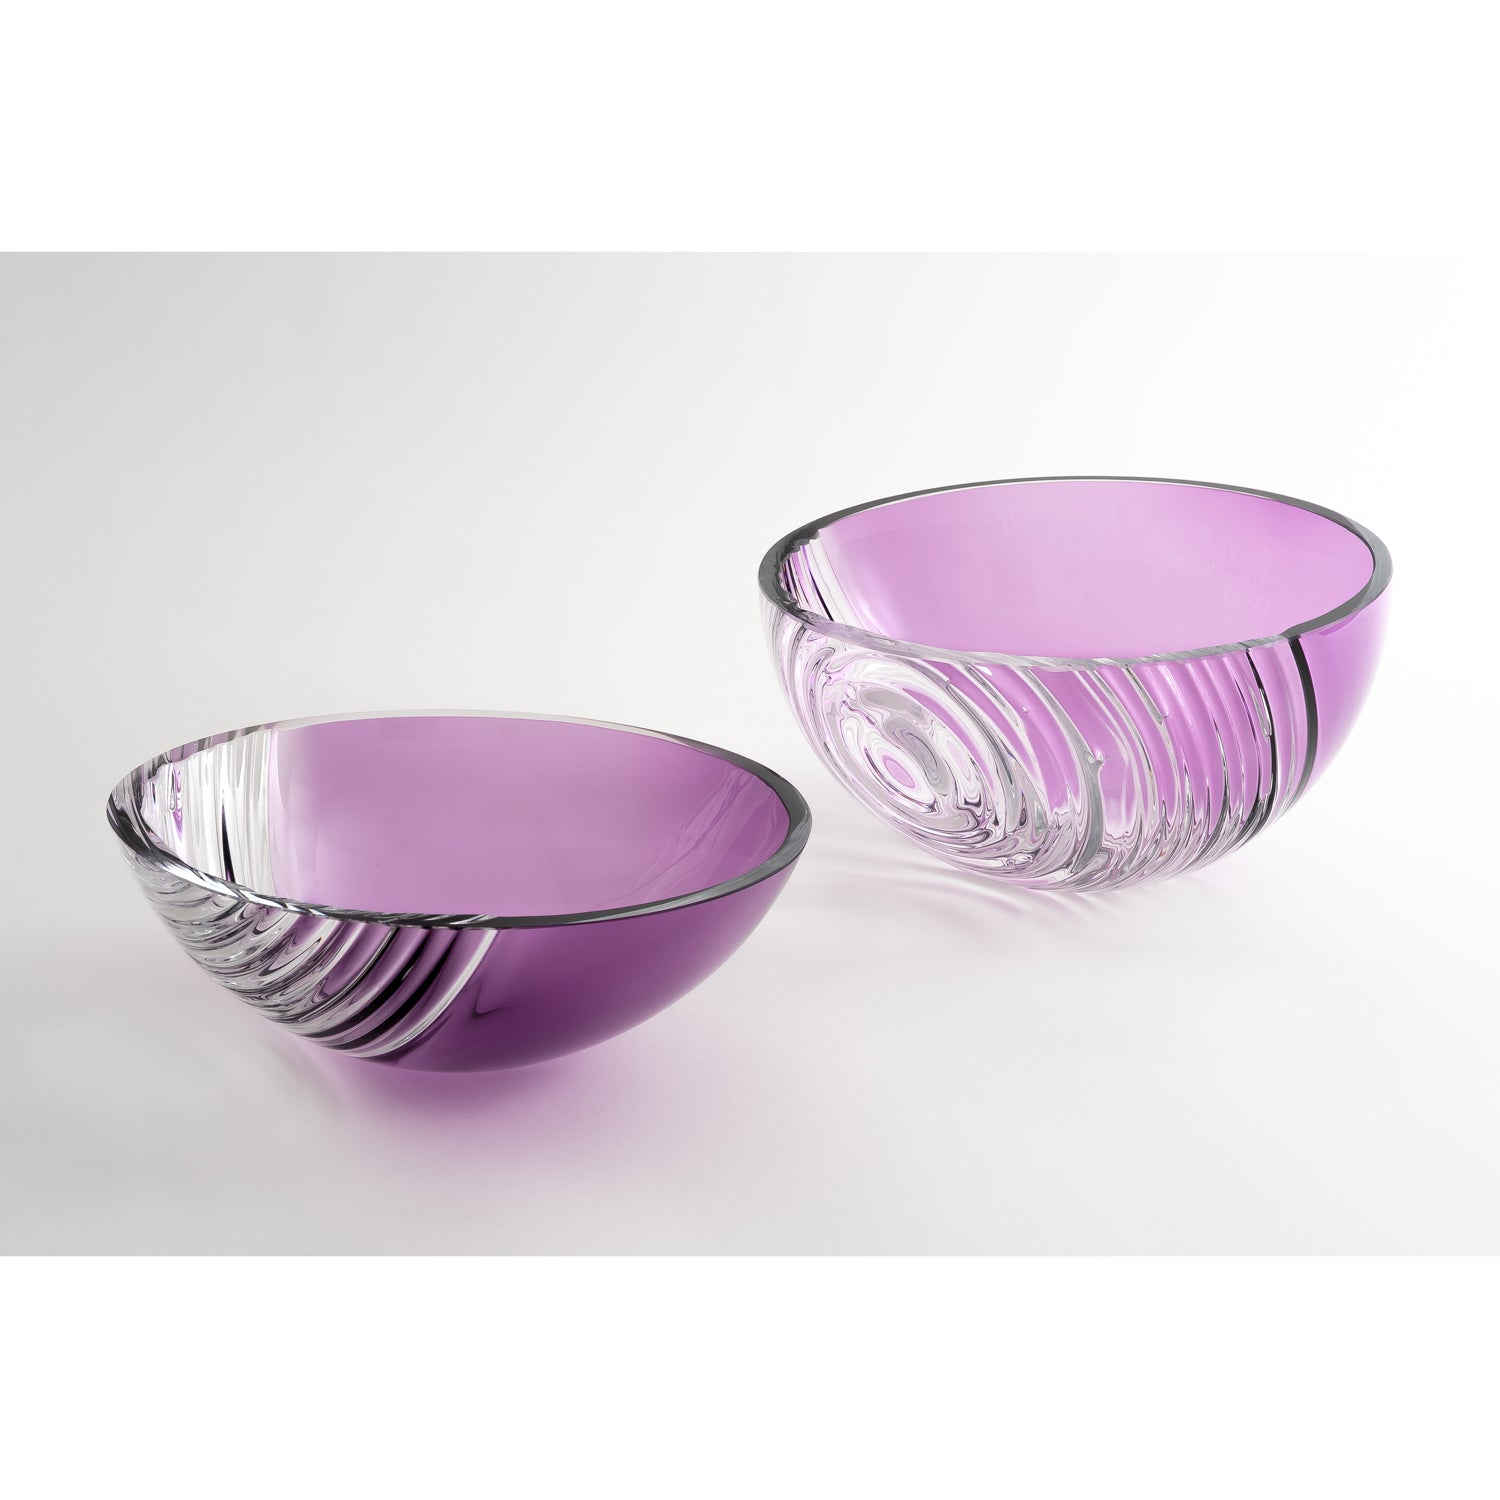 Jaan Andres-Axis Bowl Amethyst